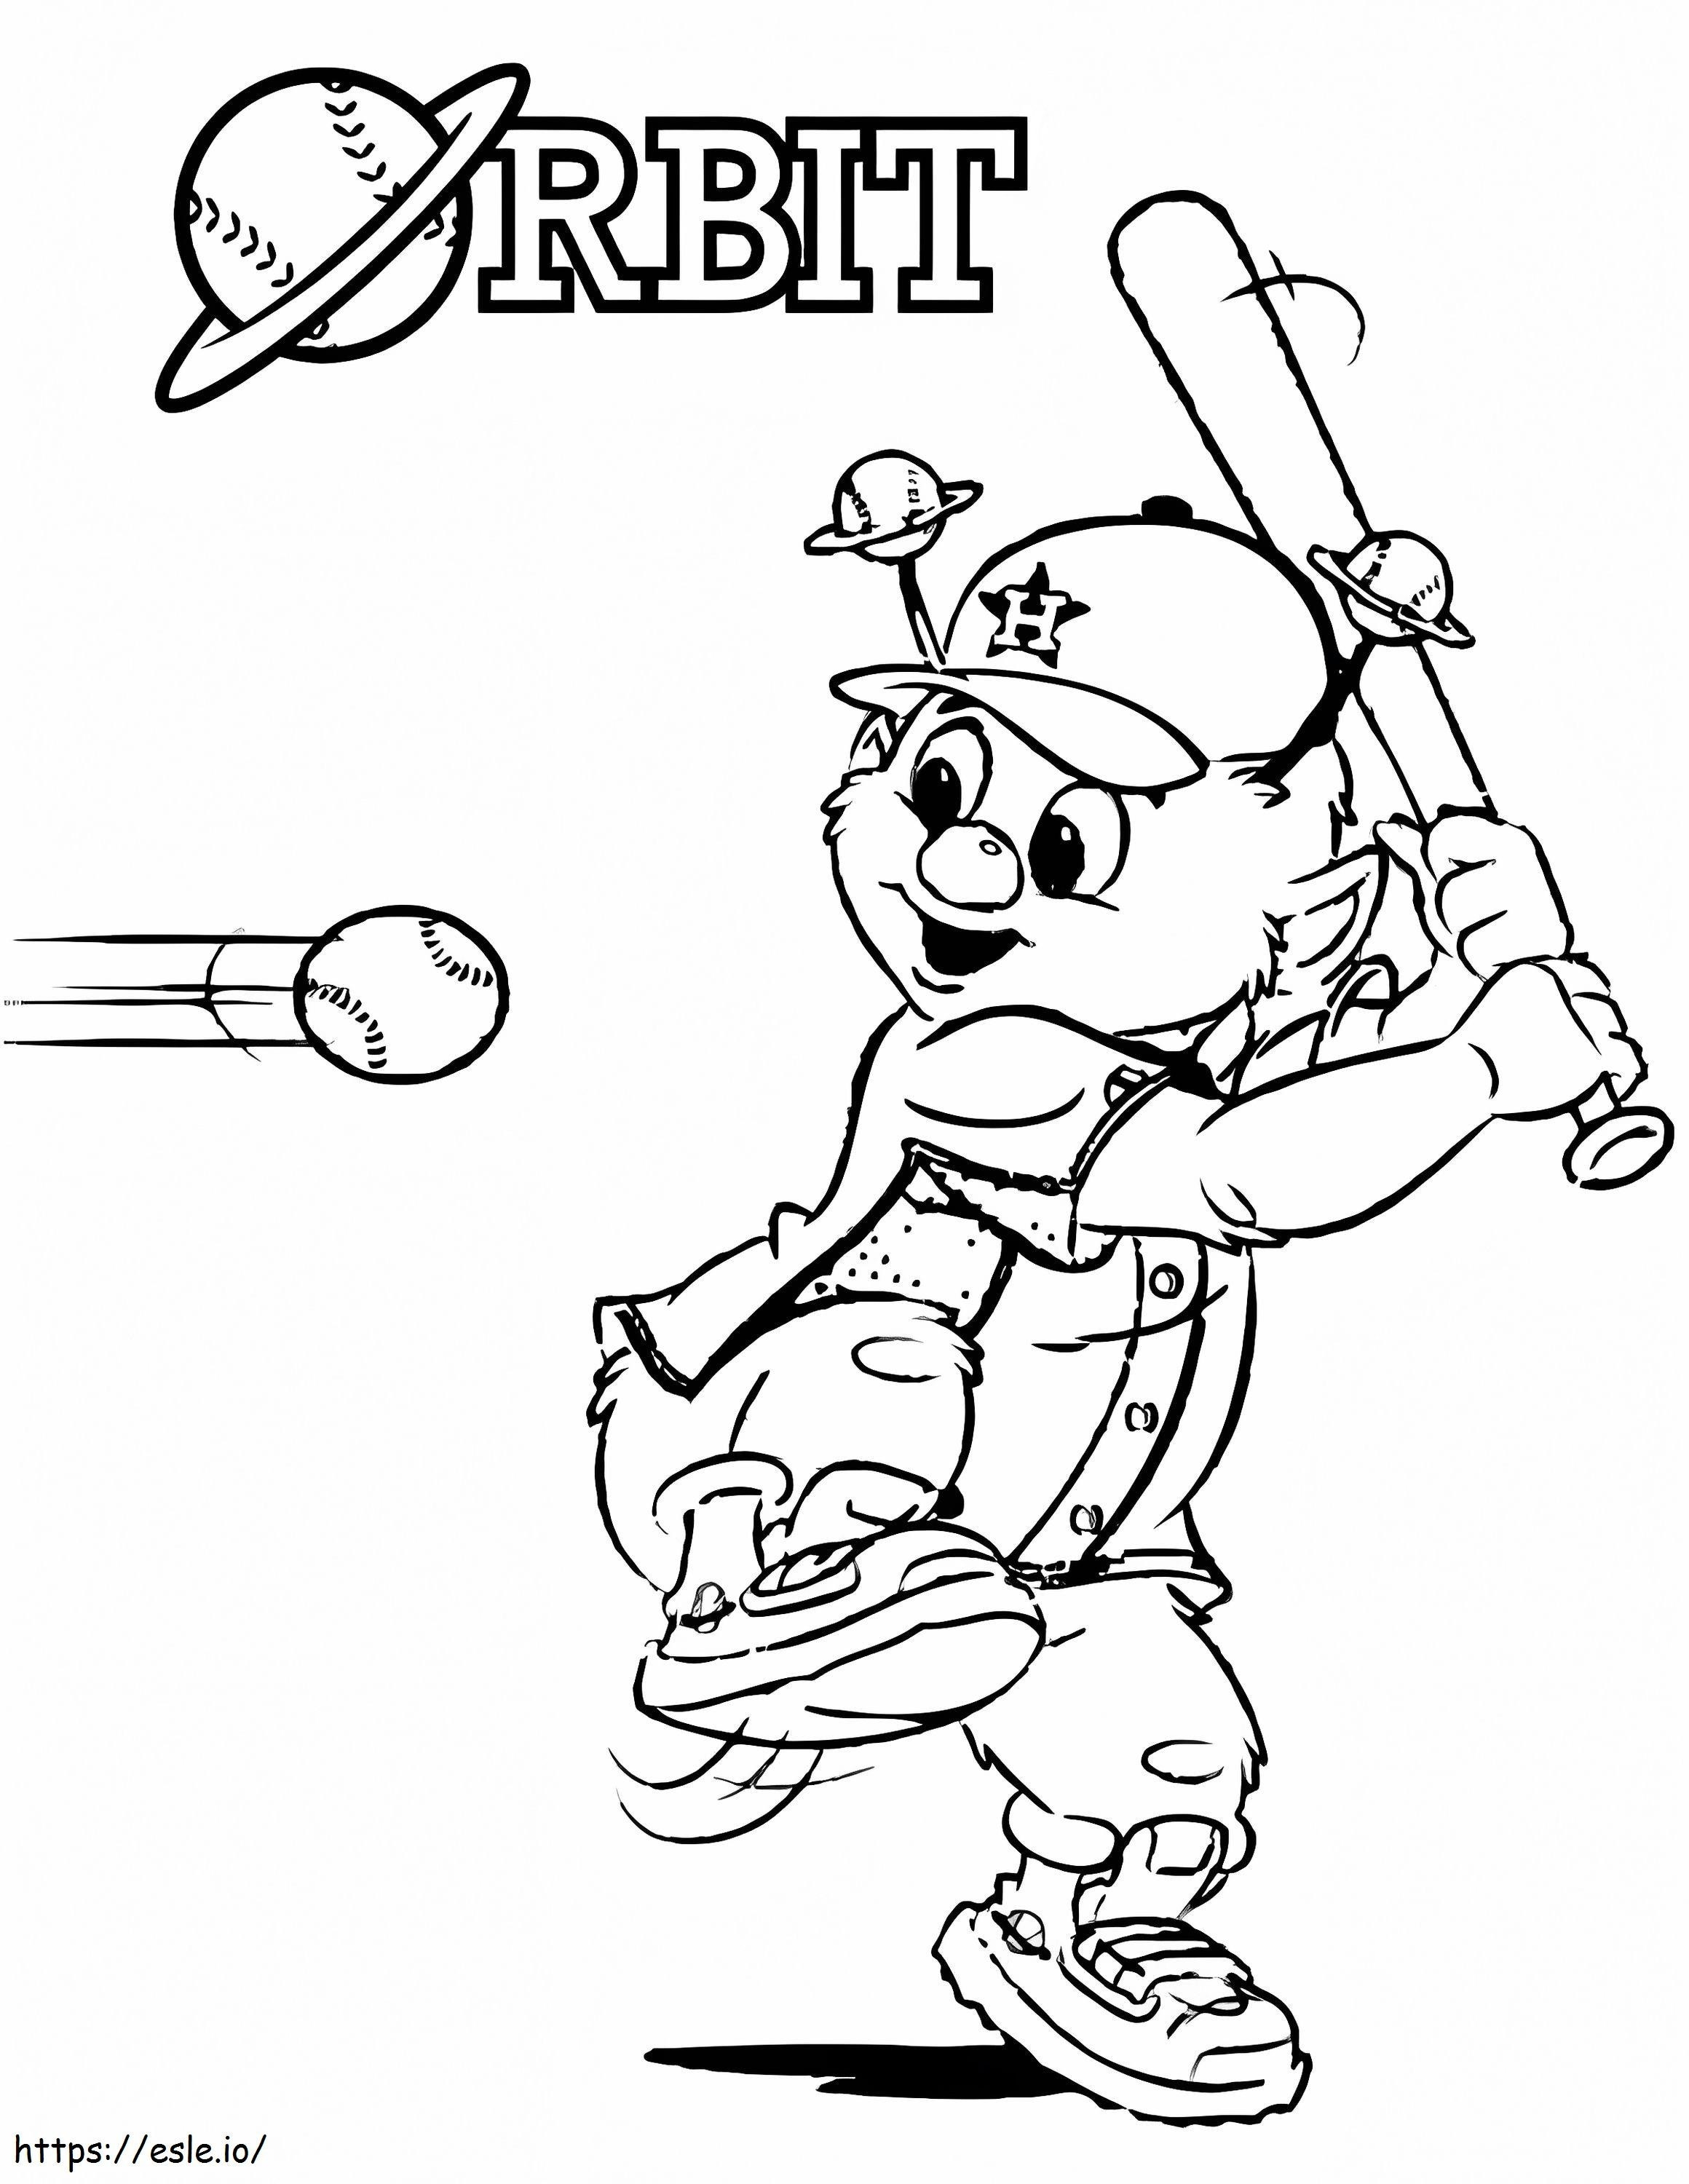 Orbit The Mascot In MLB coloring page